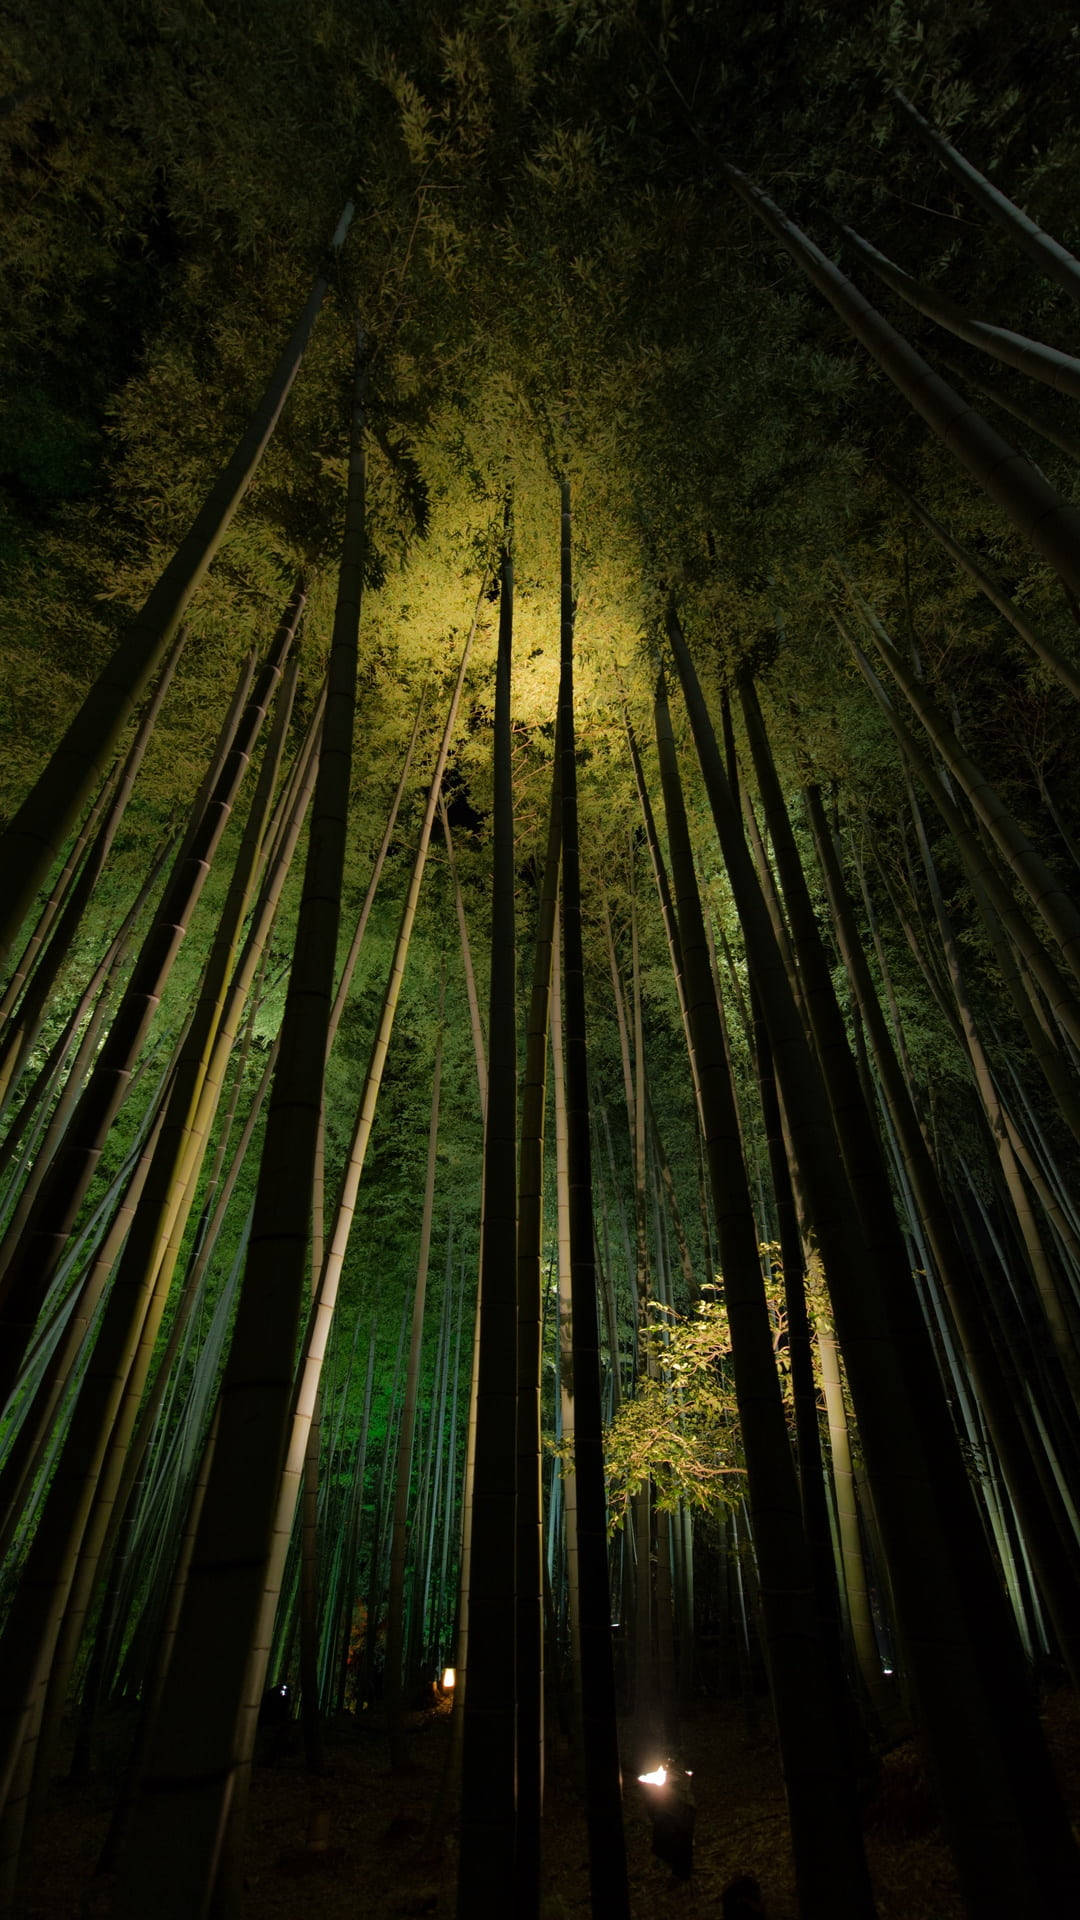 Nighttime Bamboo Forest iPhone Wallpaper